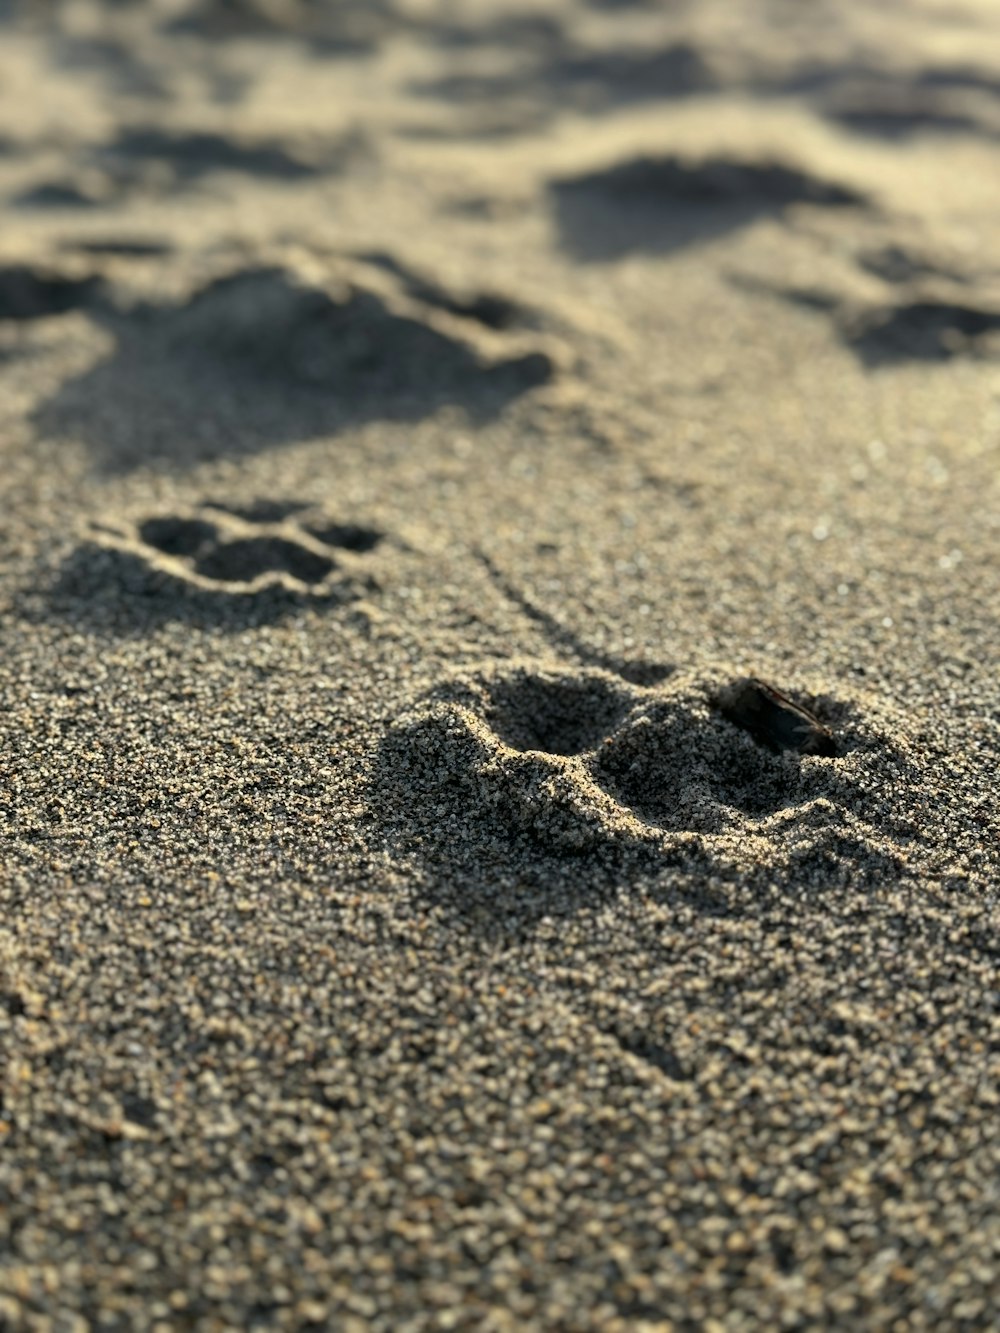 a dog paw prints in the sand on a beach